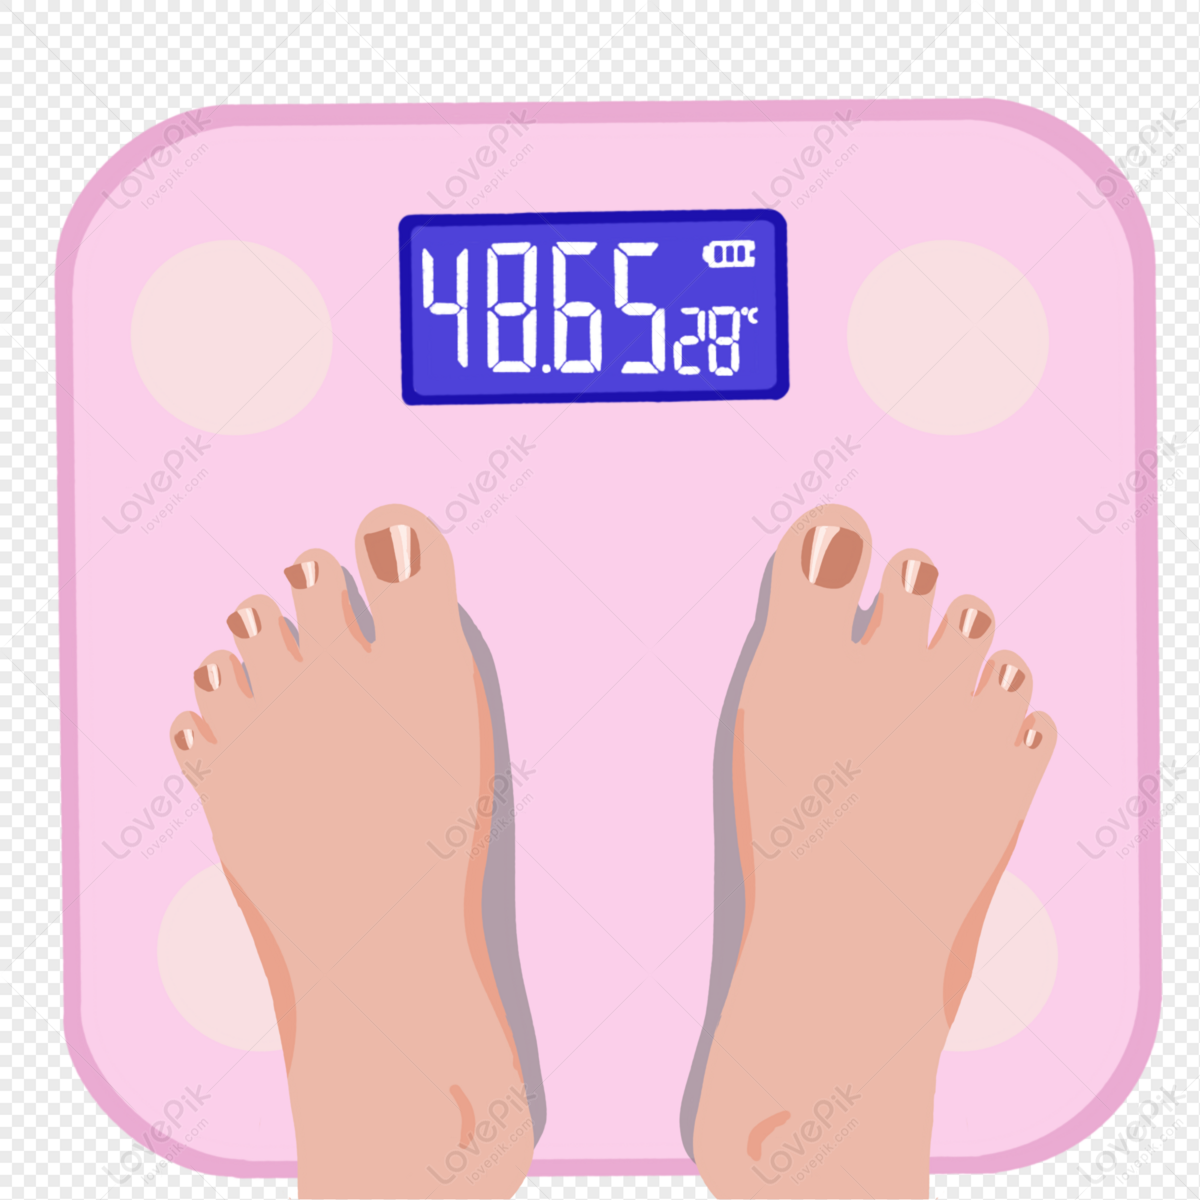 Weighing Scale PNG Picture, Weighing Scale, Love, Pink, Body Weight PNG  Image For Free Download